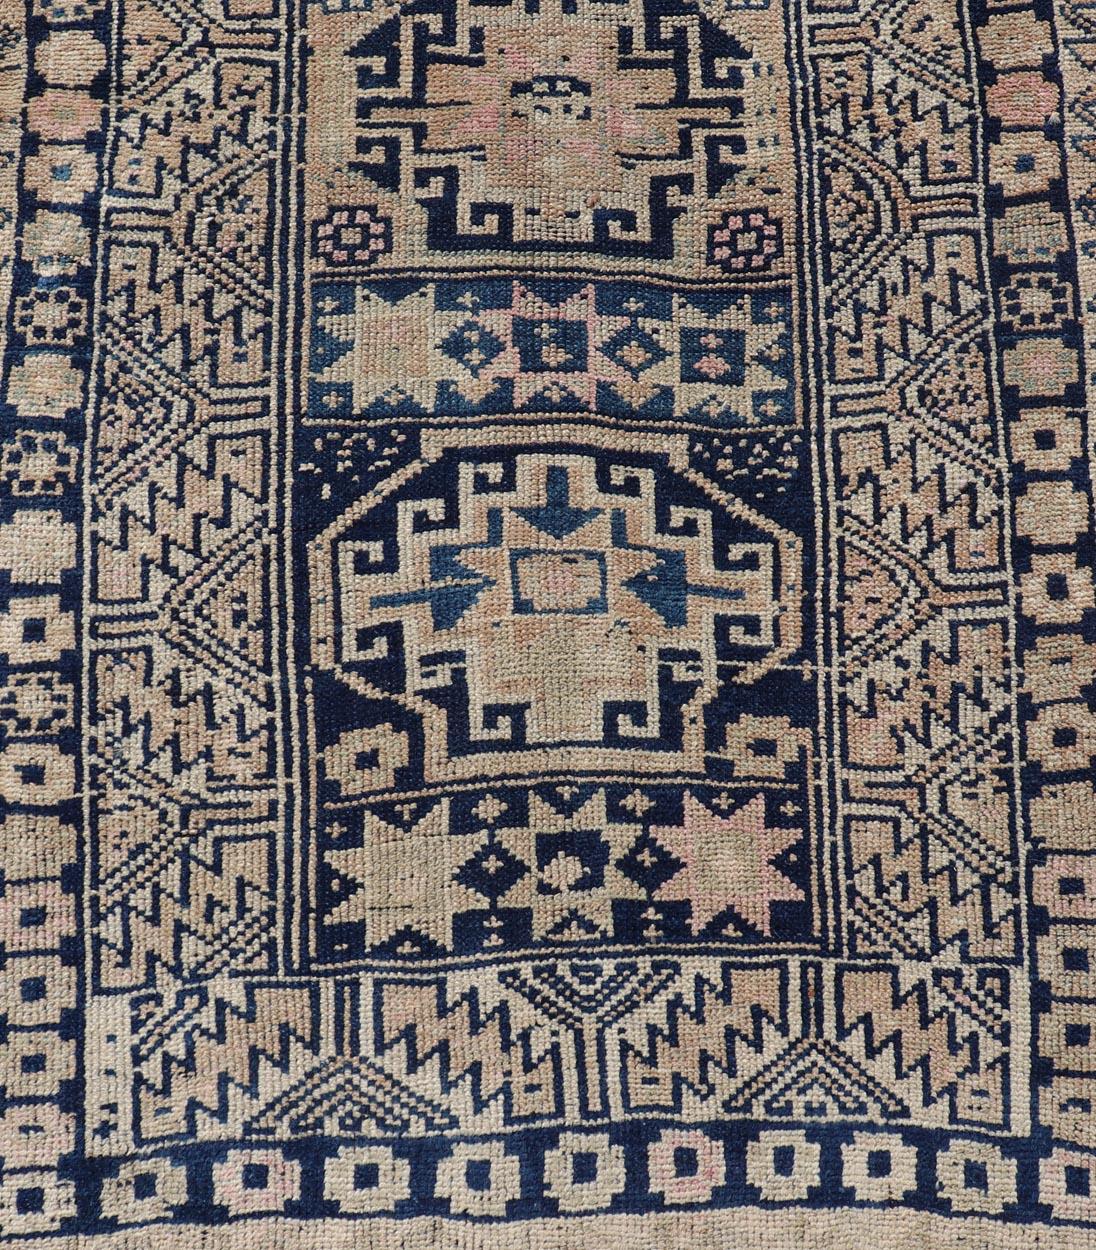 Vintage Oushak Turkish Runner with Geometric Design in Blues, Taupe, and Cream In Good Condition For Sale In Atlanta, GA